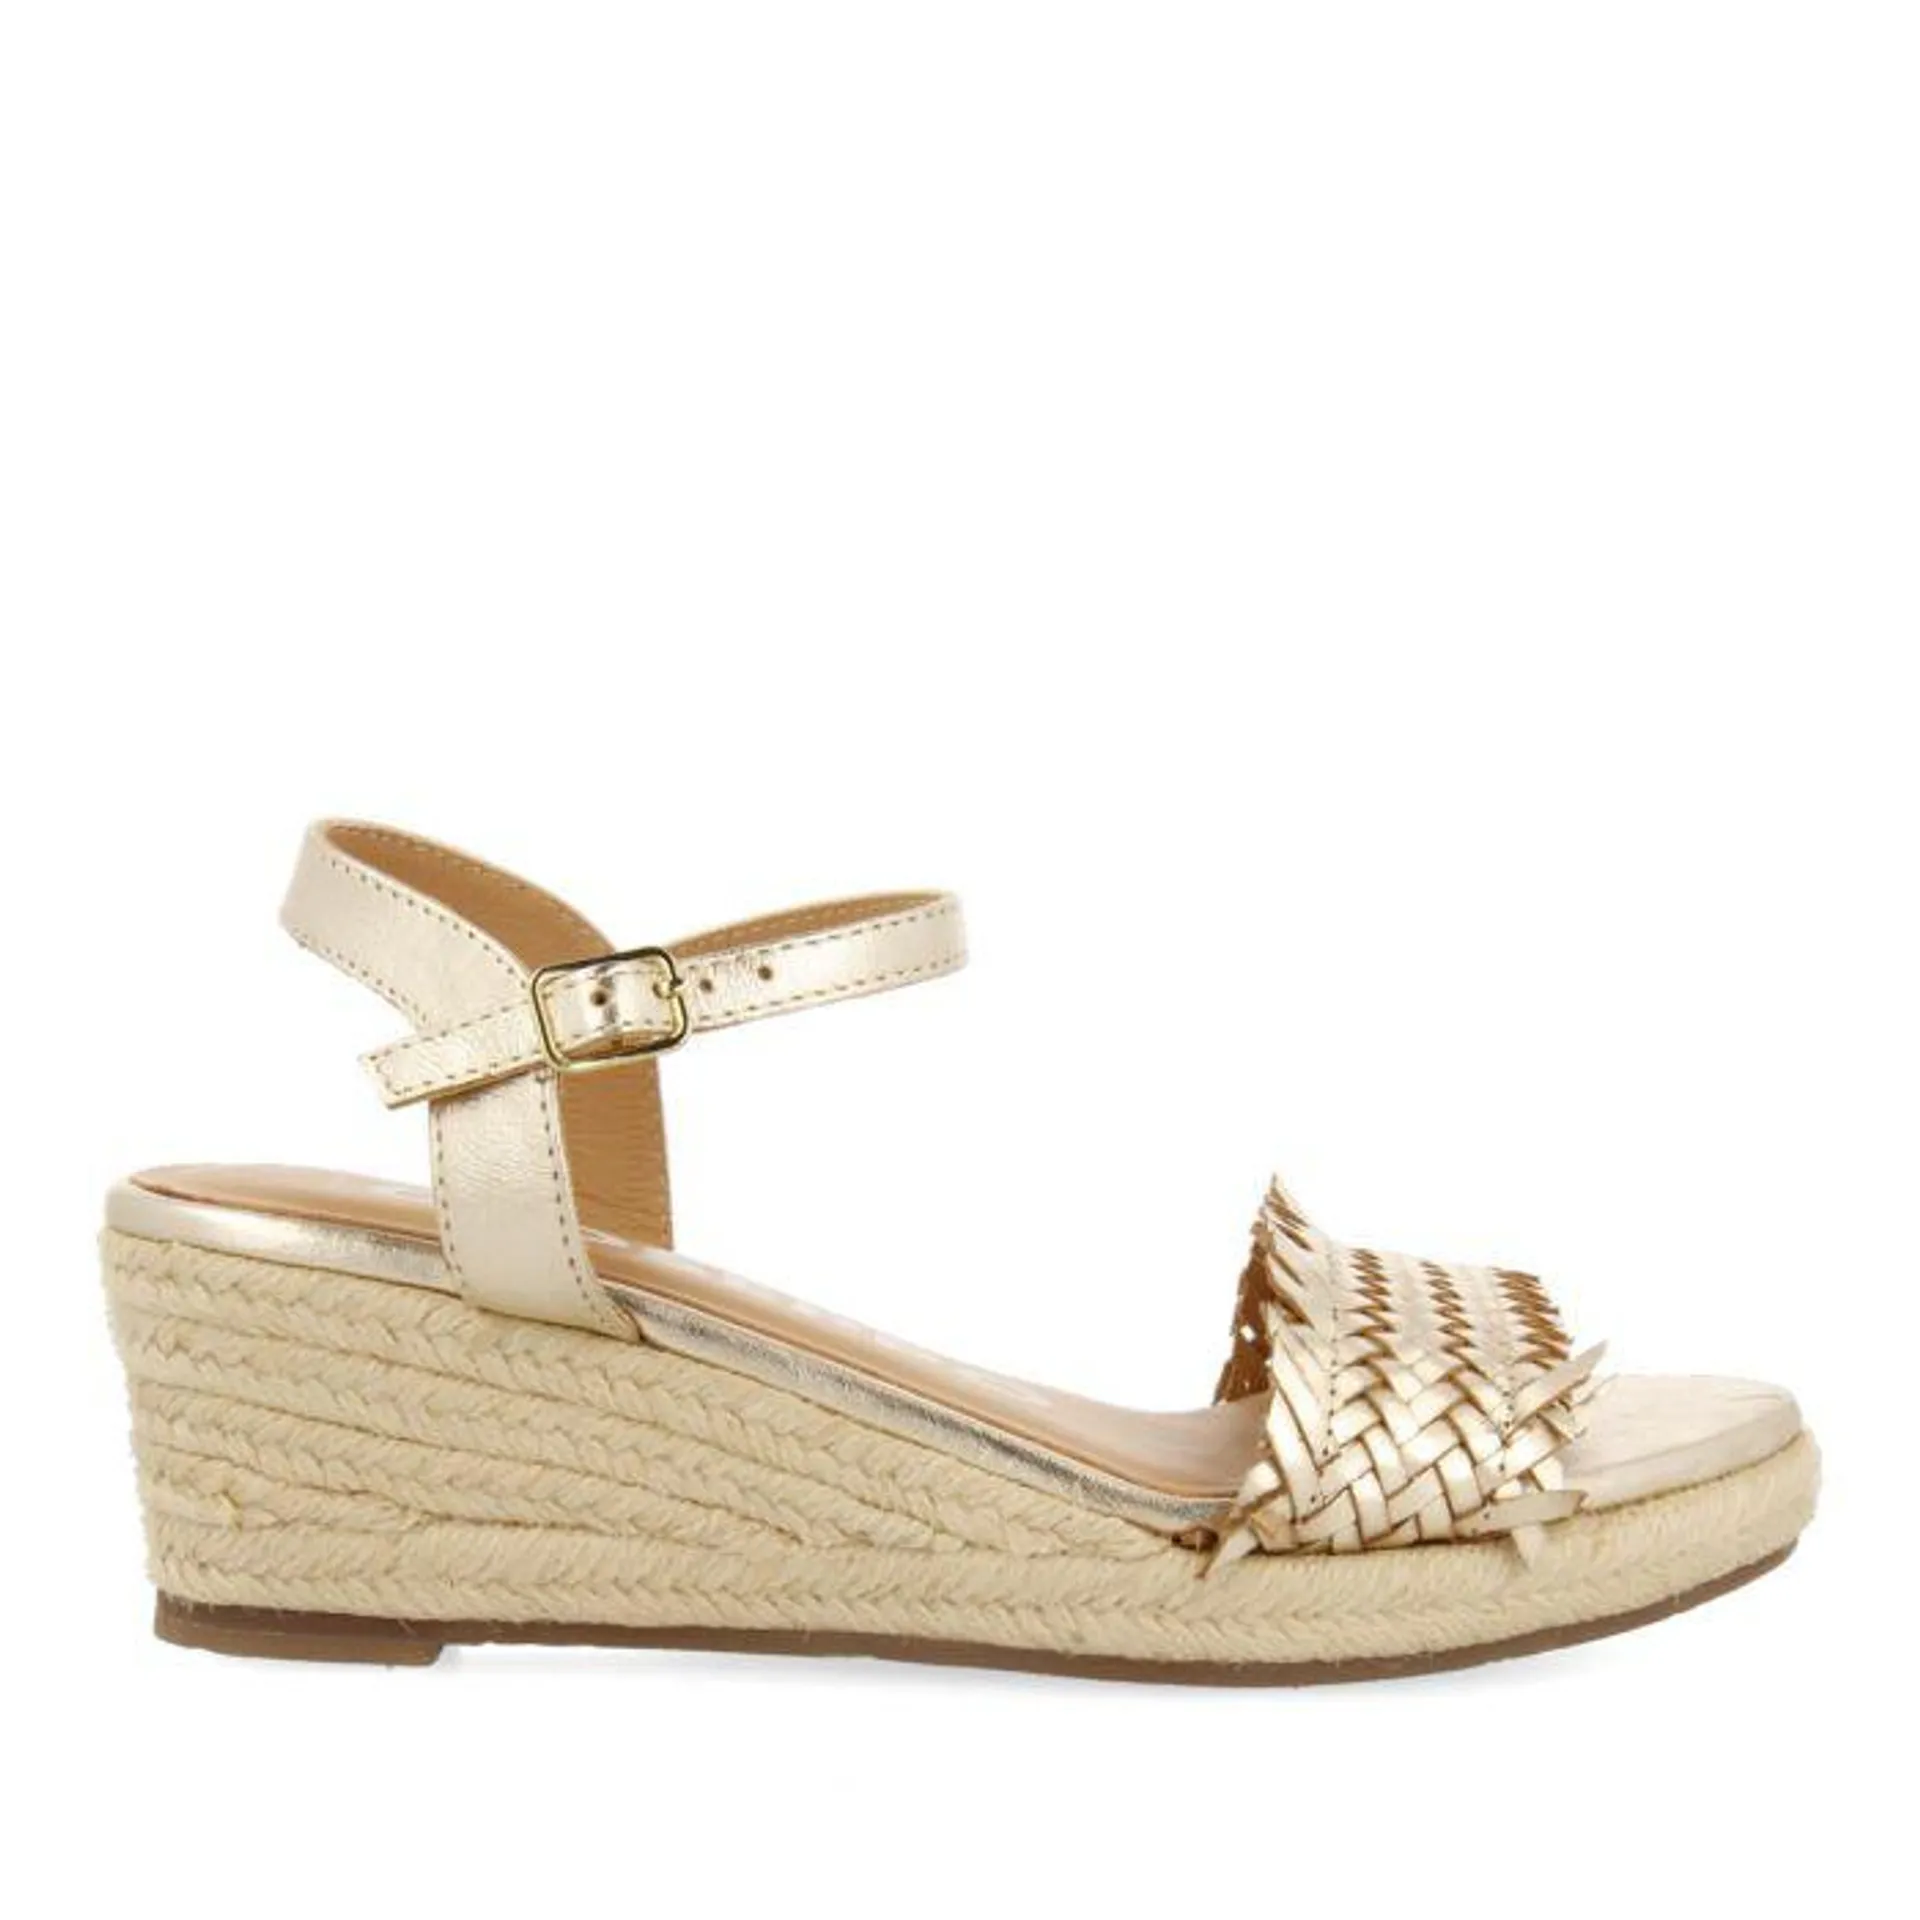 Ica women's gold braided sandals with jute wedges